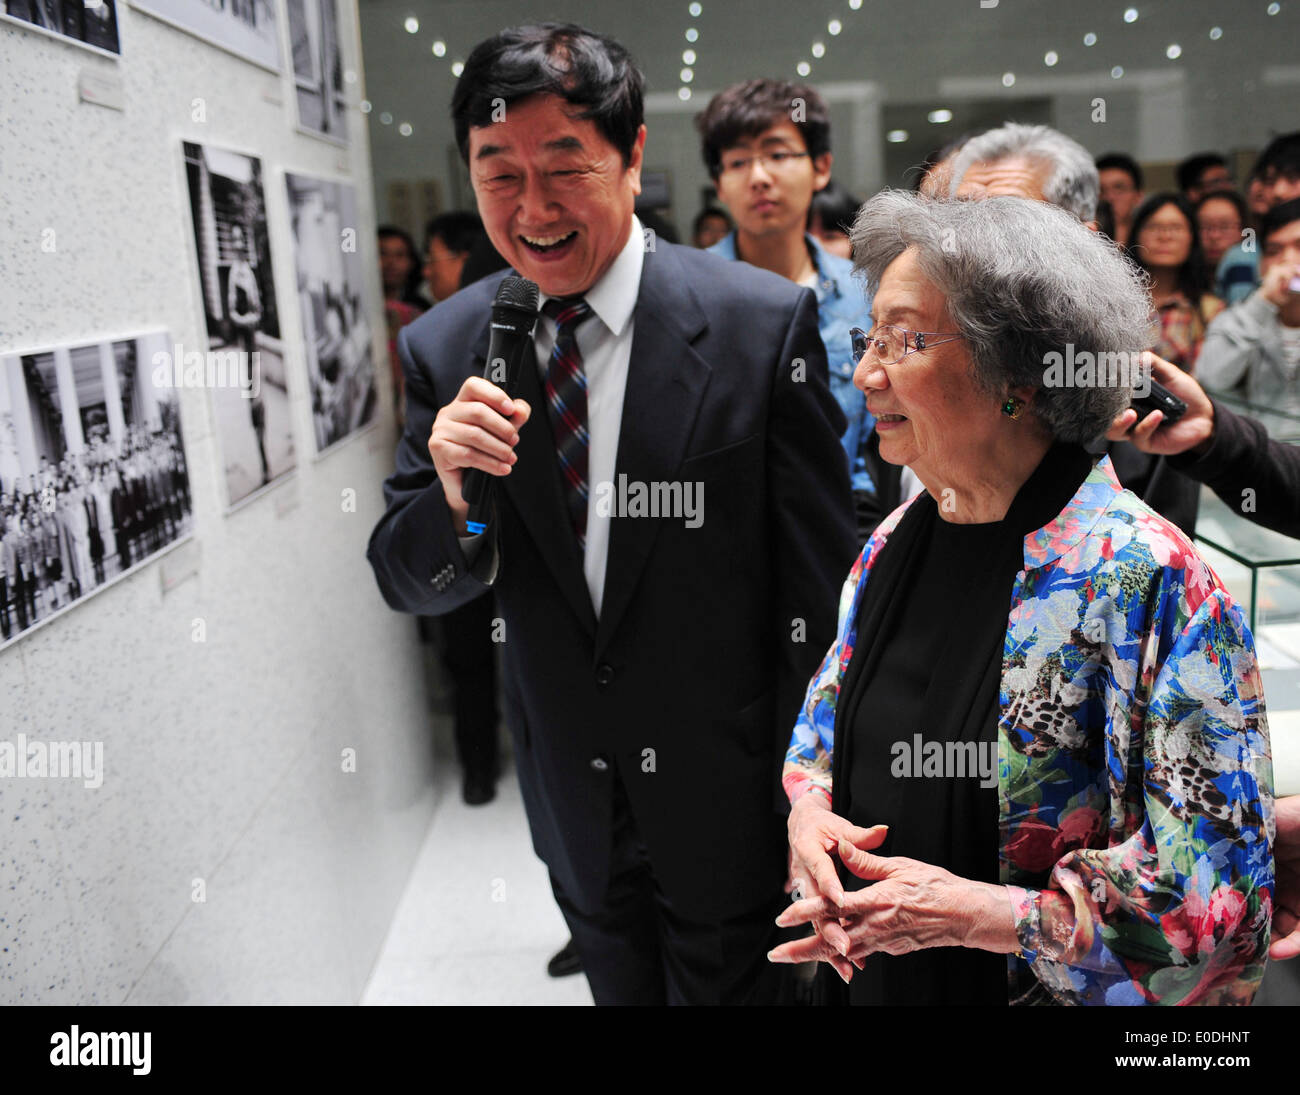 Tianjin, China. 10th May, 2014. Ye Jiaying (front), famous scholar of Chinese literature, visits an exhibition during an event to mark Ye's 90th birthday at Nankai University in Tianjin, north China, May 10, 2014. Ye is a professor of classical Chinese literature and also a tenured faculty member at the University of British Columbia in Canada. Credit:  Zhang Chenlin/Xinhua/Alamy Live News Stock Photo